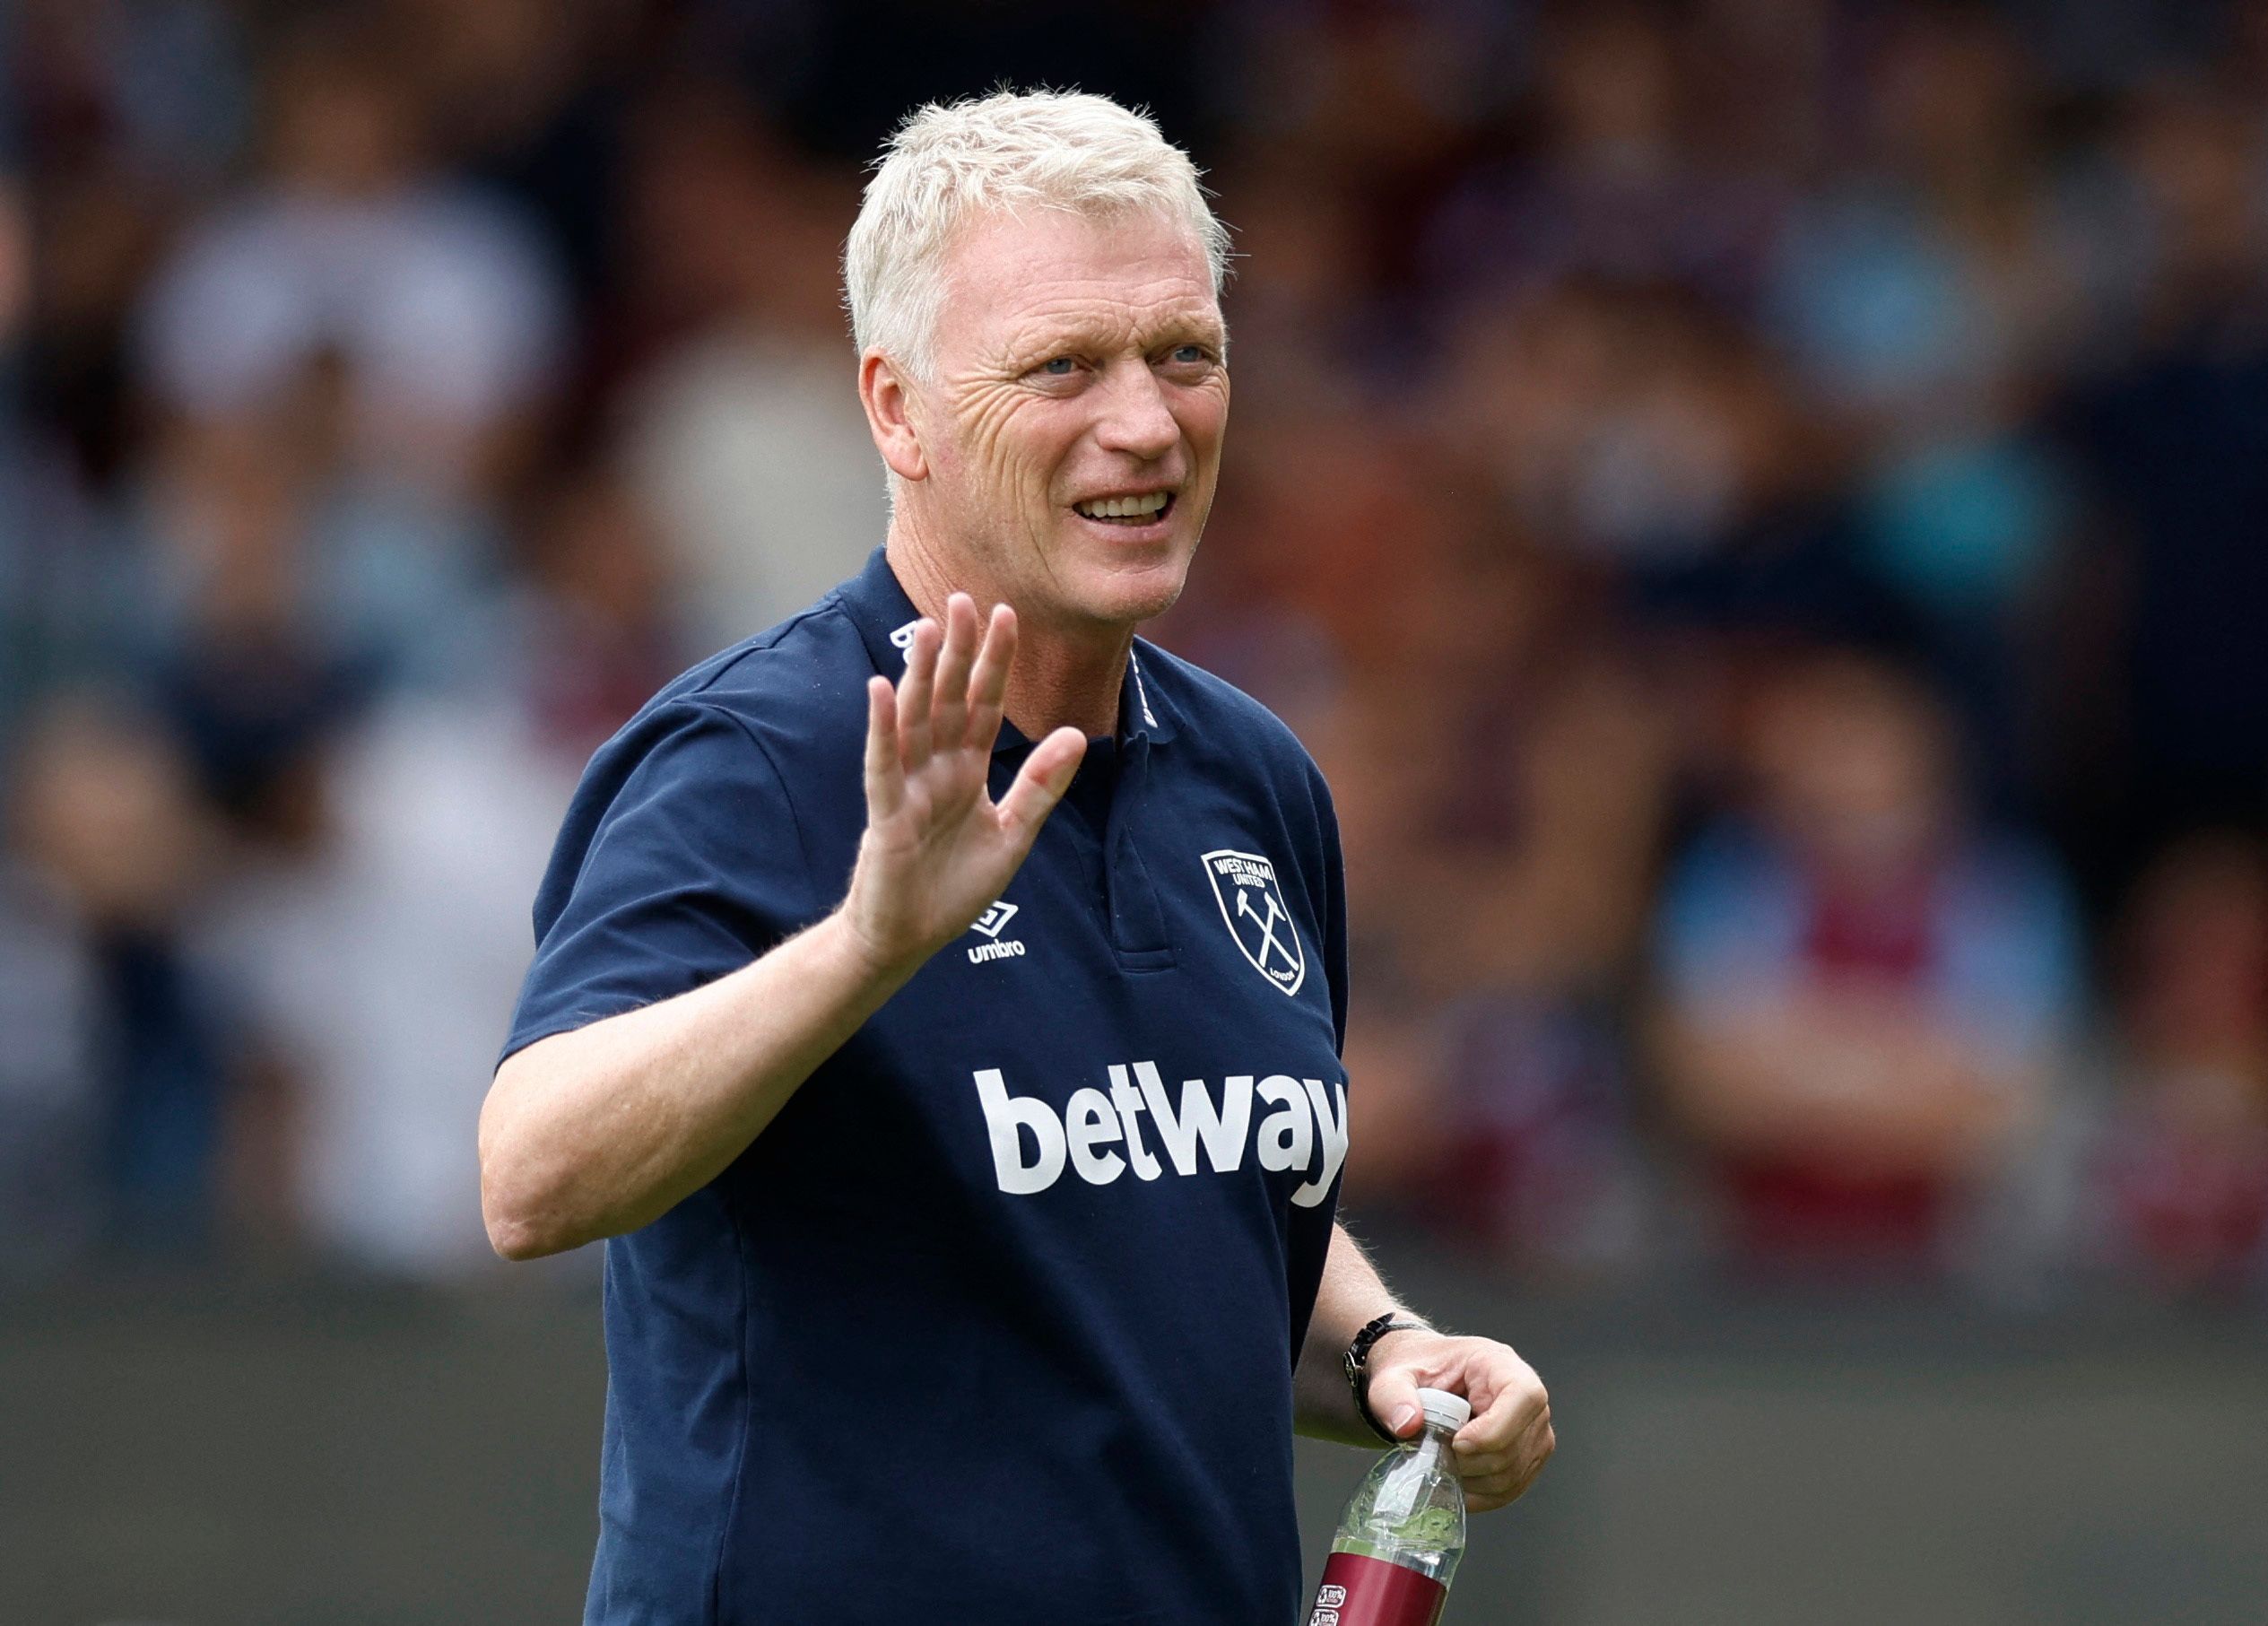 Soccer Football - Pre Season Friendly - Luton Town v West Ham United - Kenilworth Road, Luton, Britain - July 23, 2022 West Ham United manager David Moyes before the match Action Images via Reuters/Peter Cziborra